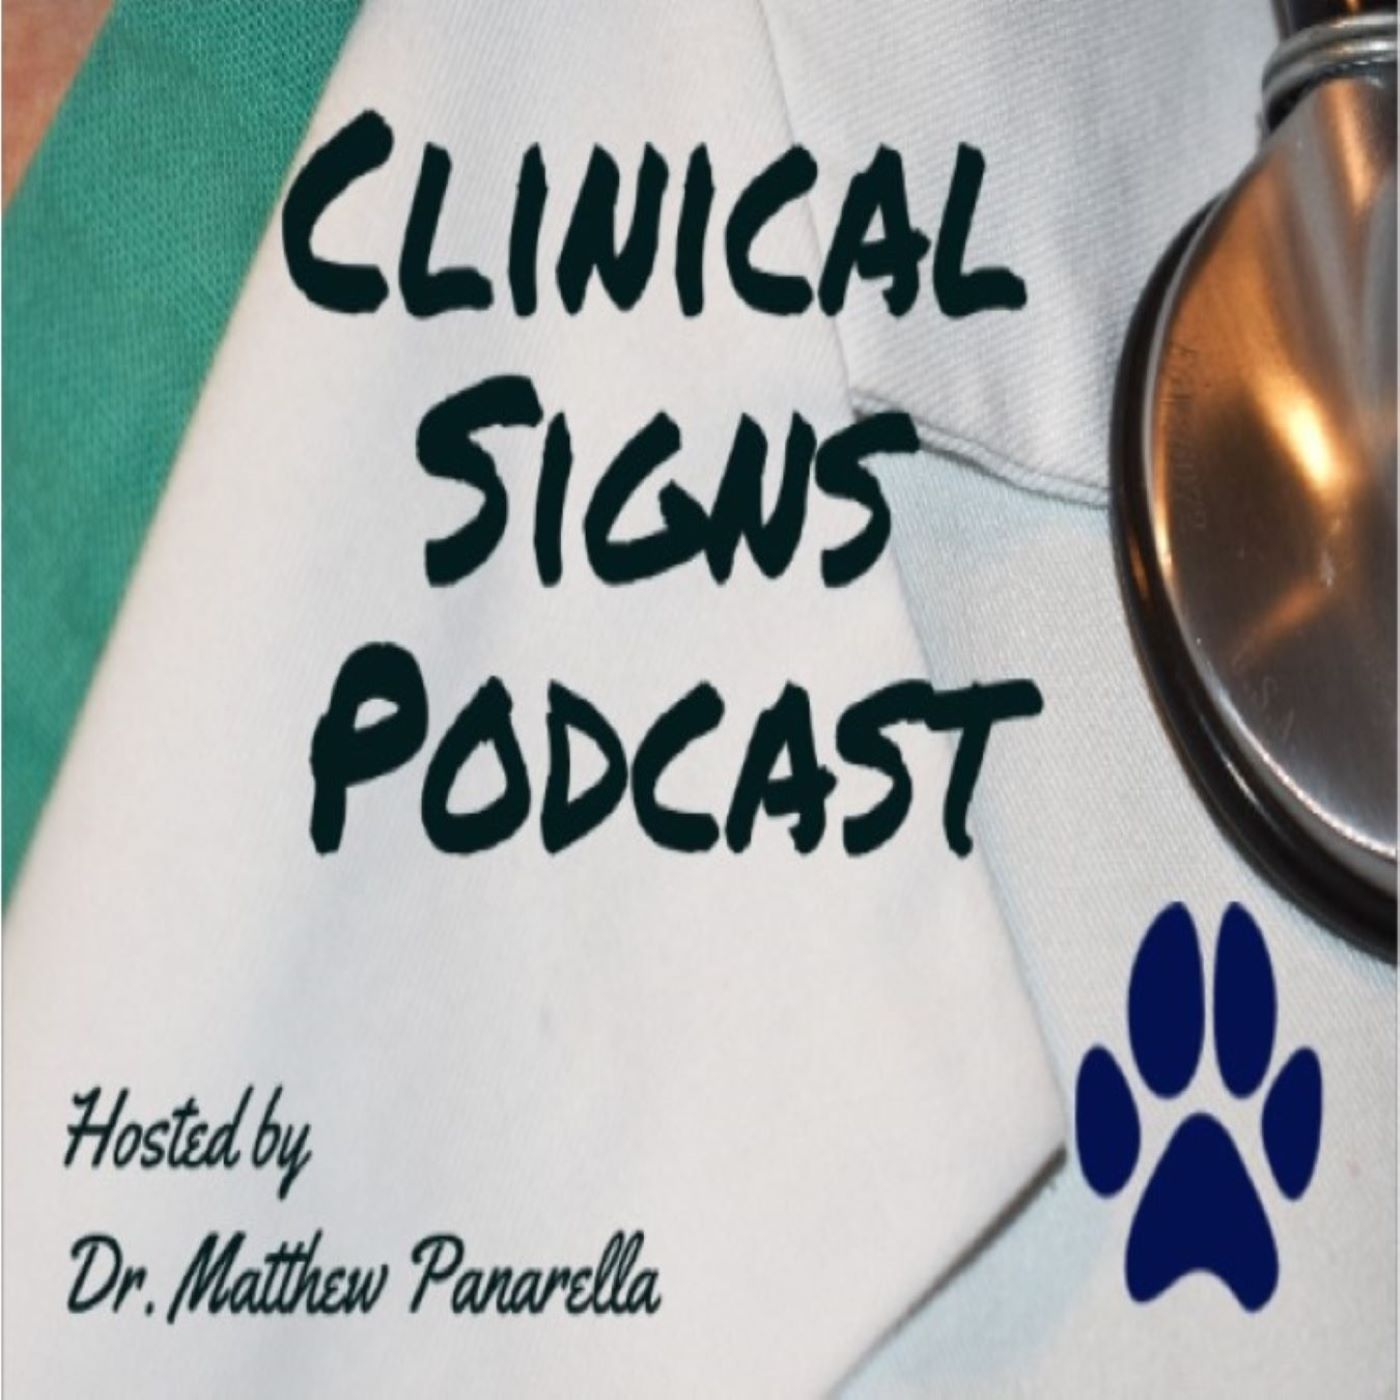 The Clinical Signs Podcast